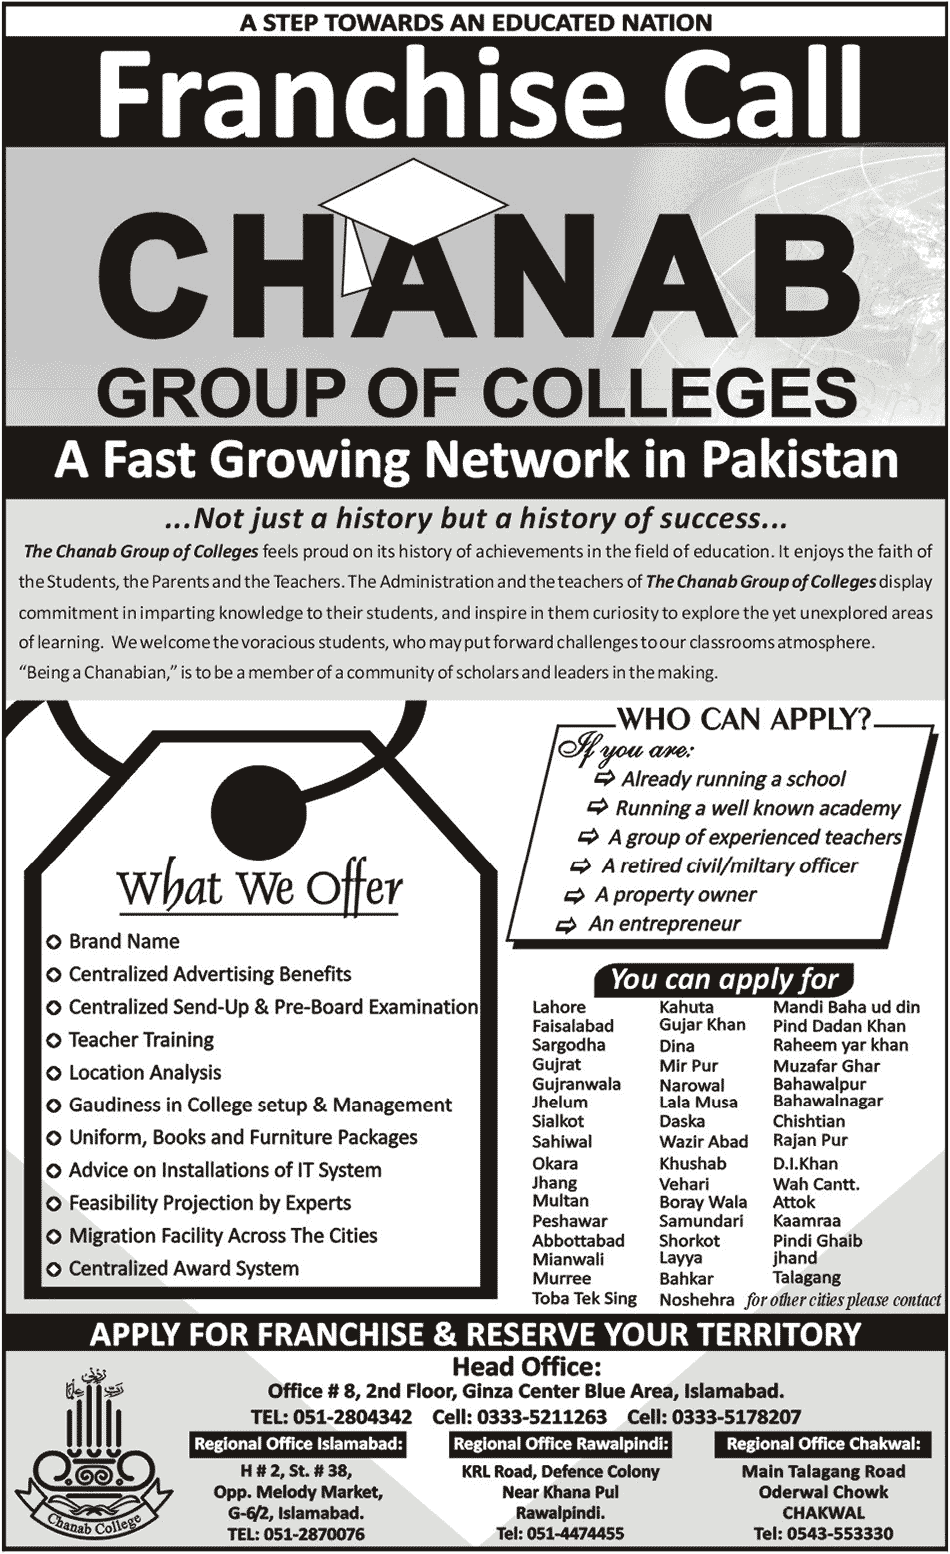 Chenab Group of Colleges Franchise Detail